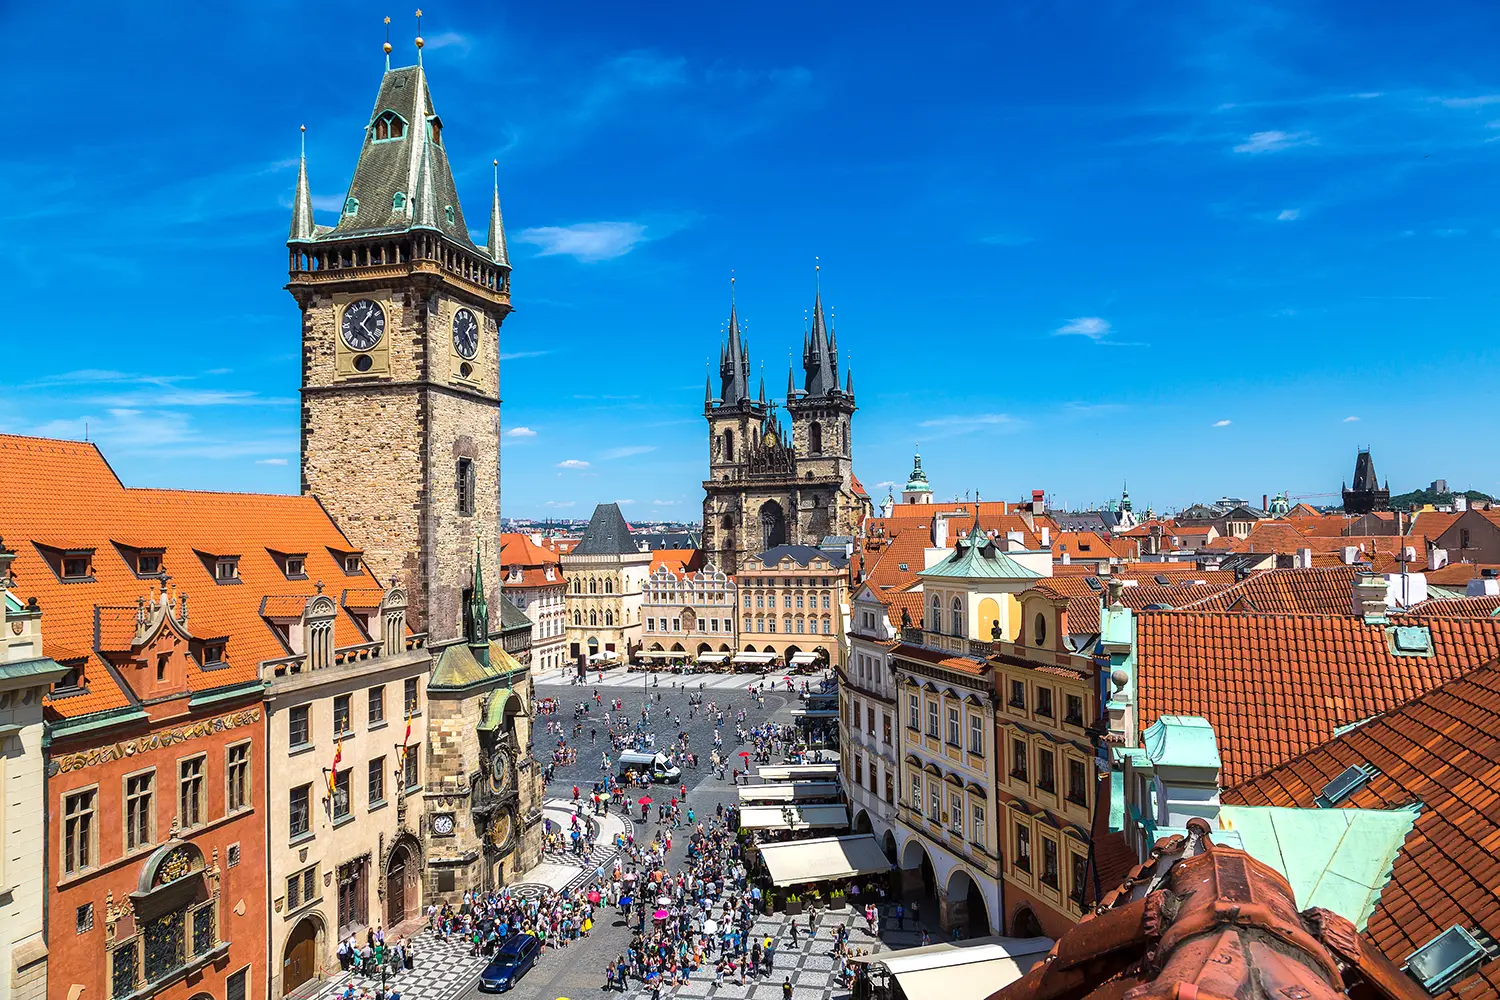 Old Town square and Clock Tower in Prague, Czechia